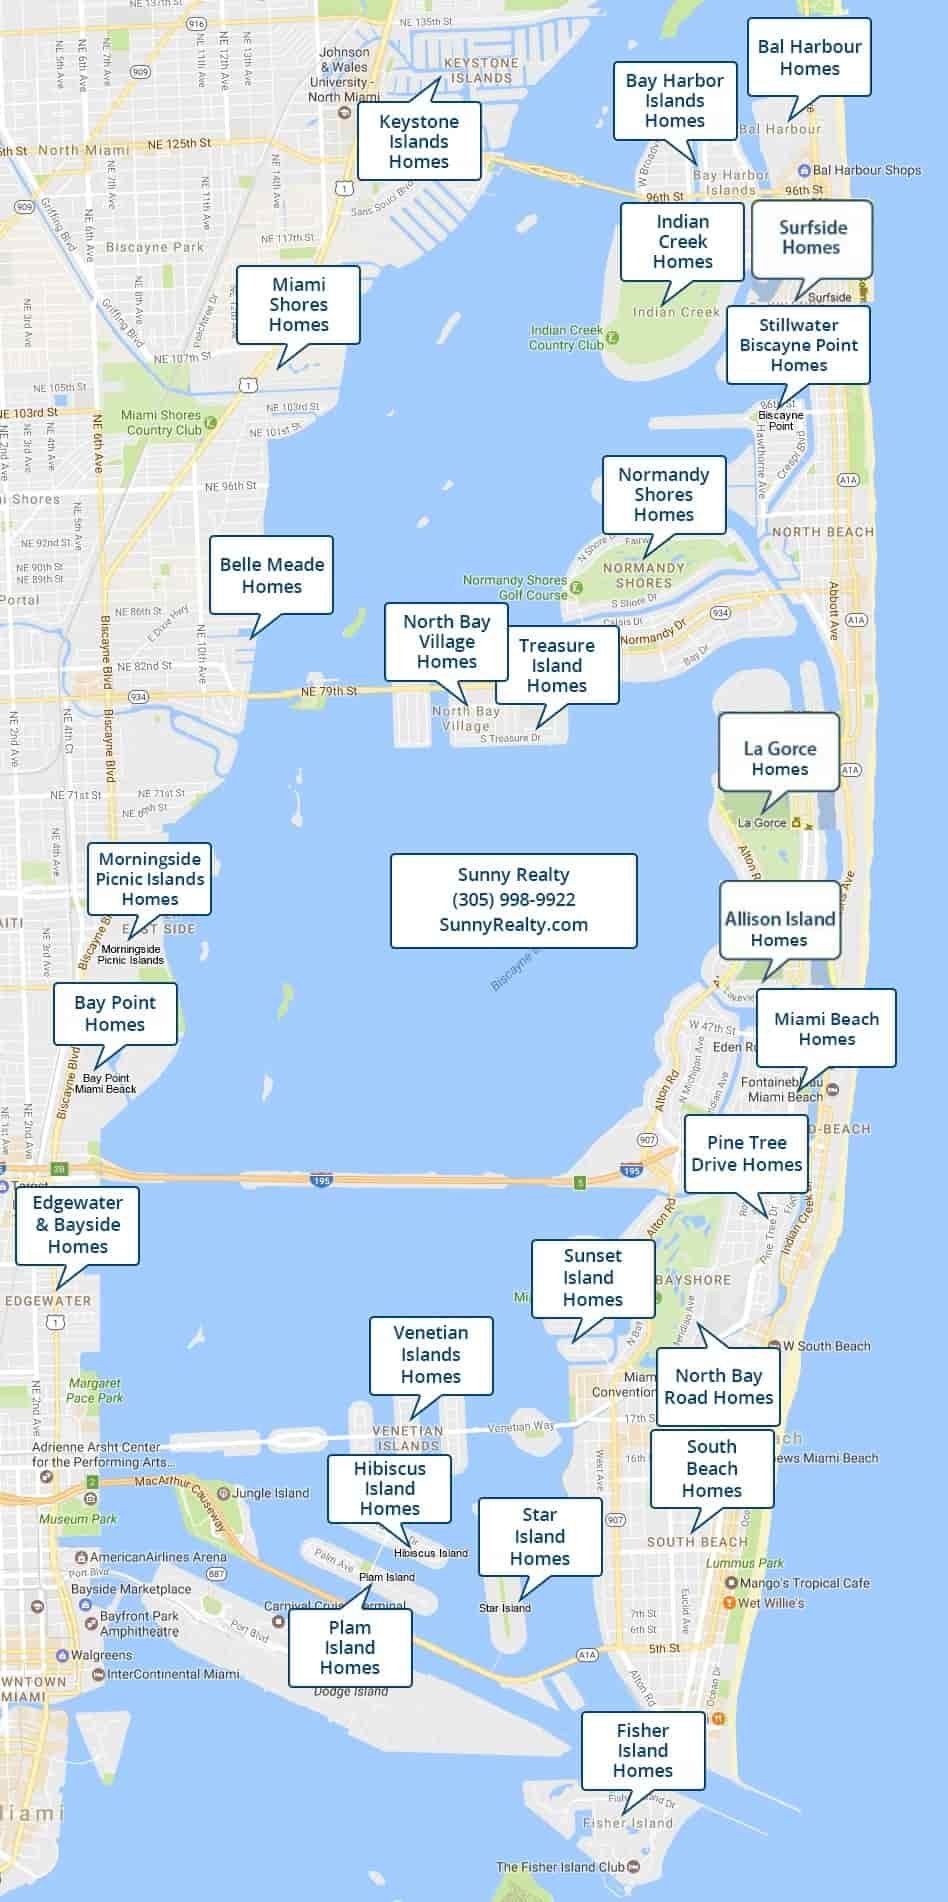 Miami Beach Waterfront Homes For Sale